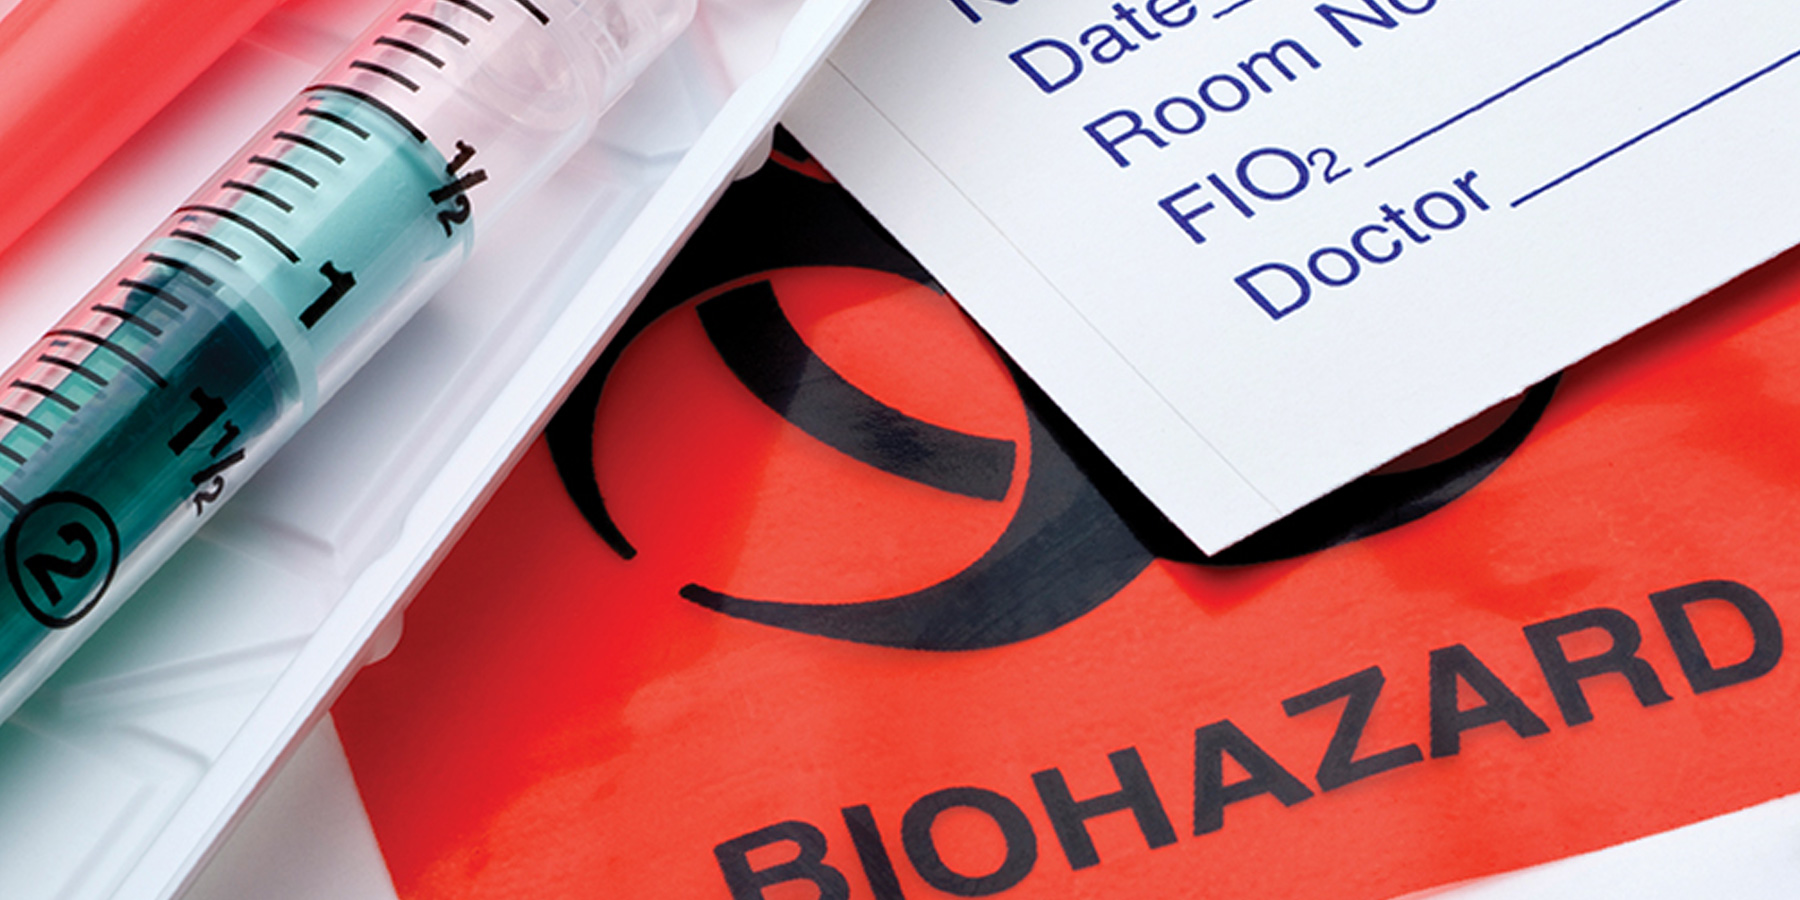 Biohazard Bags: A Vital Tool for Safeguarding Healthcare Environments and Professionals